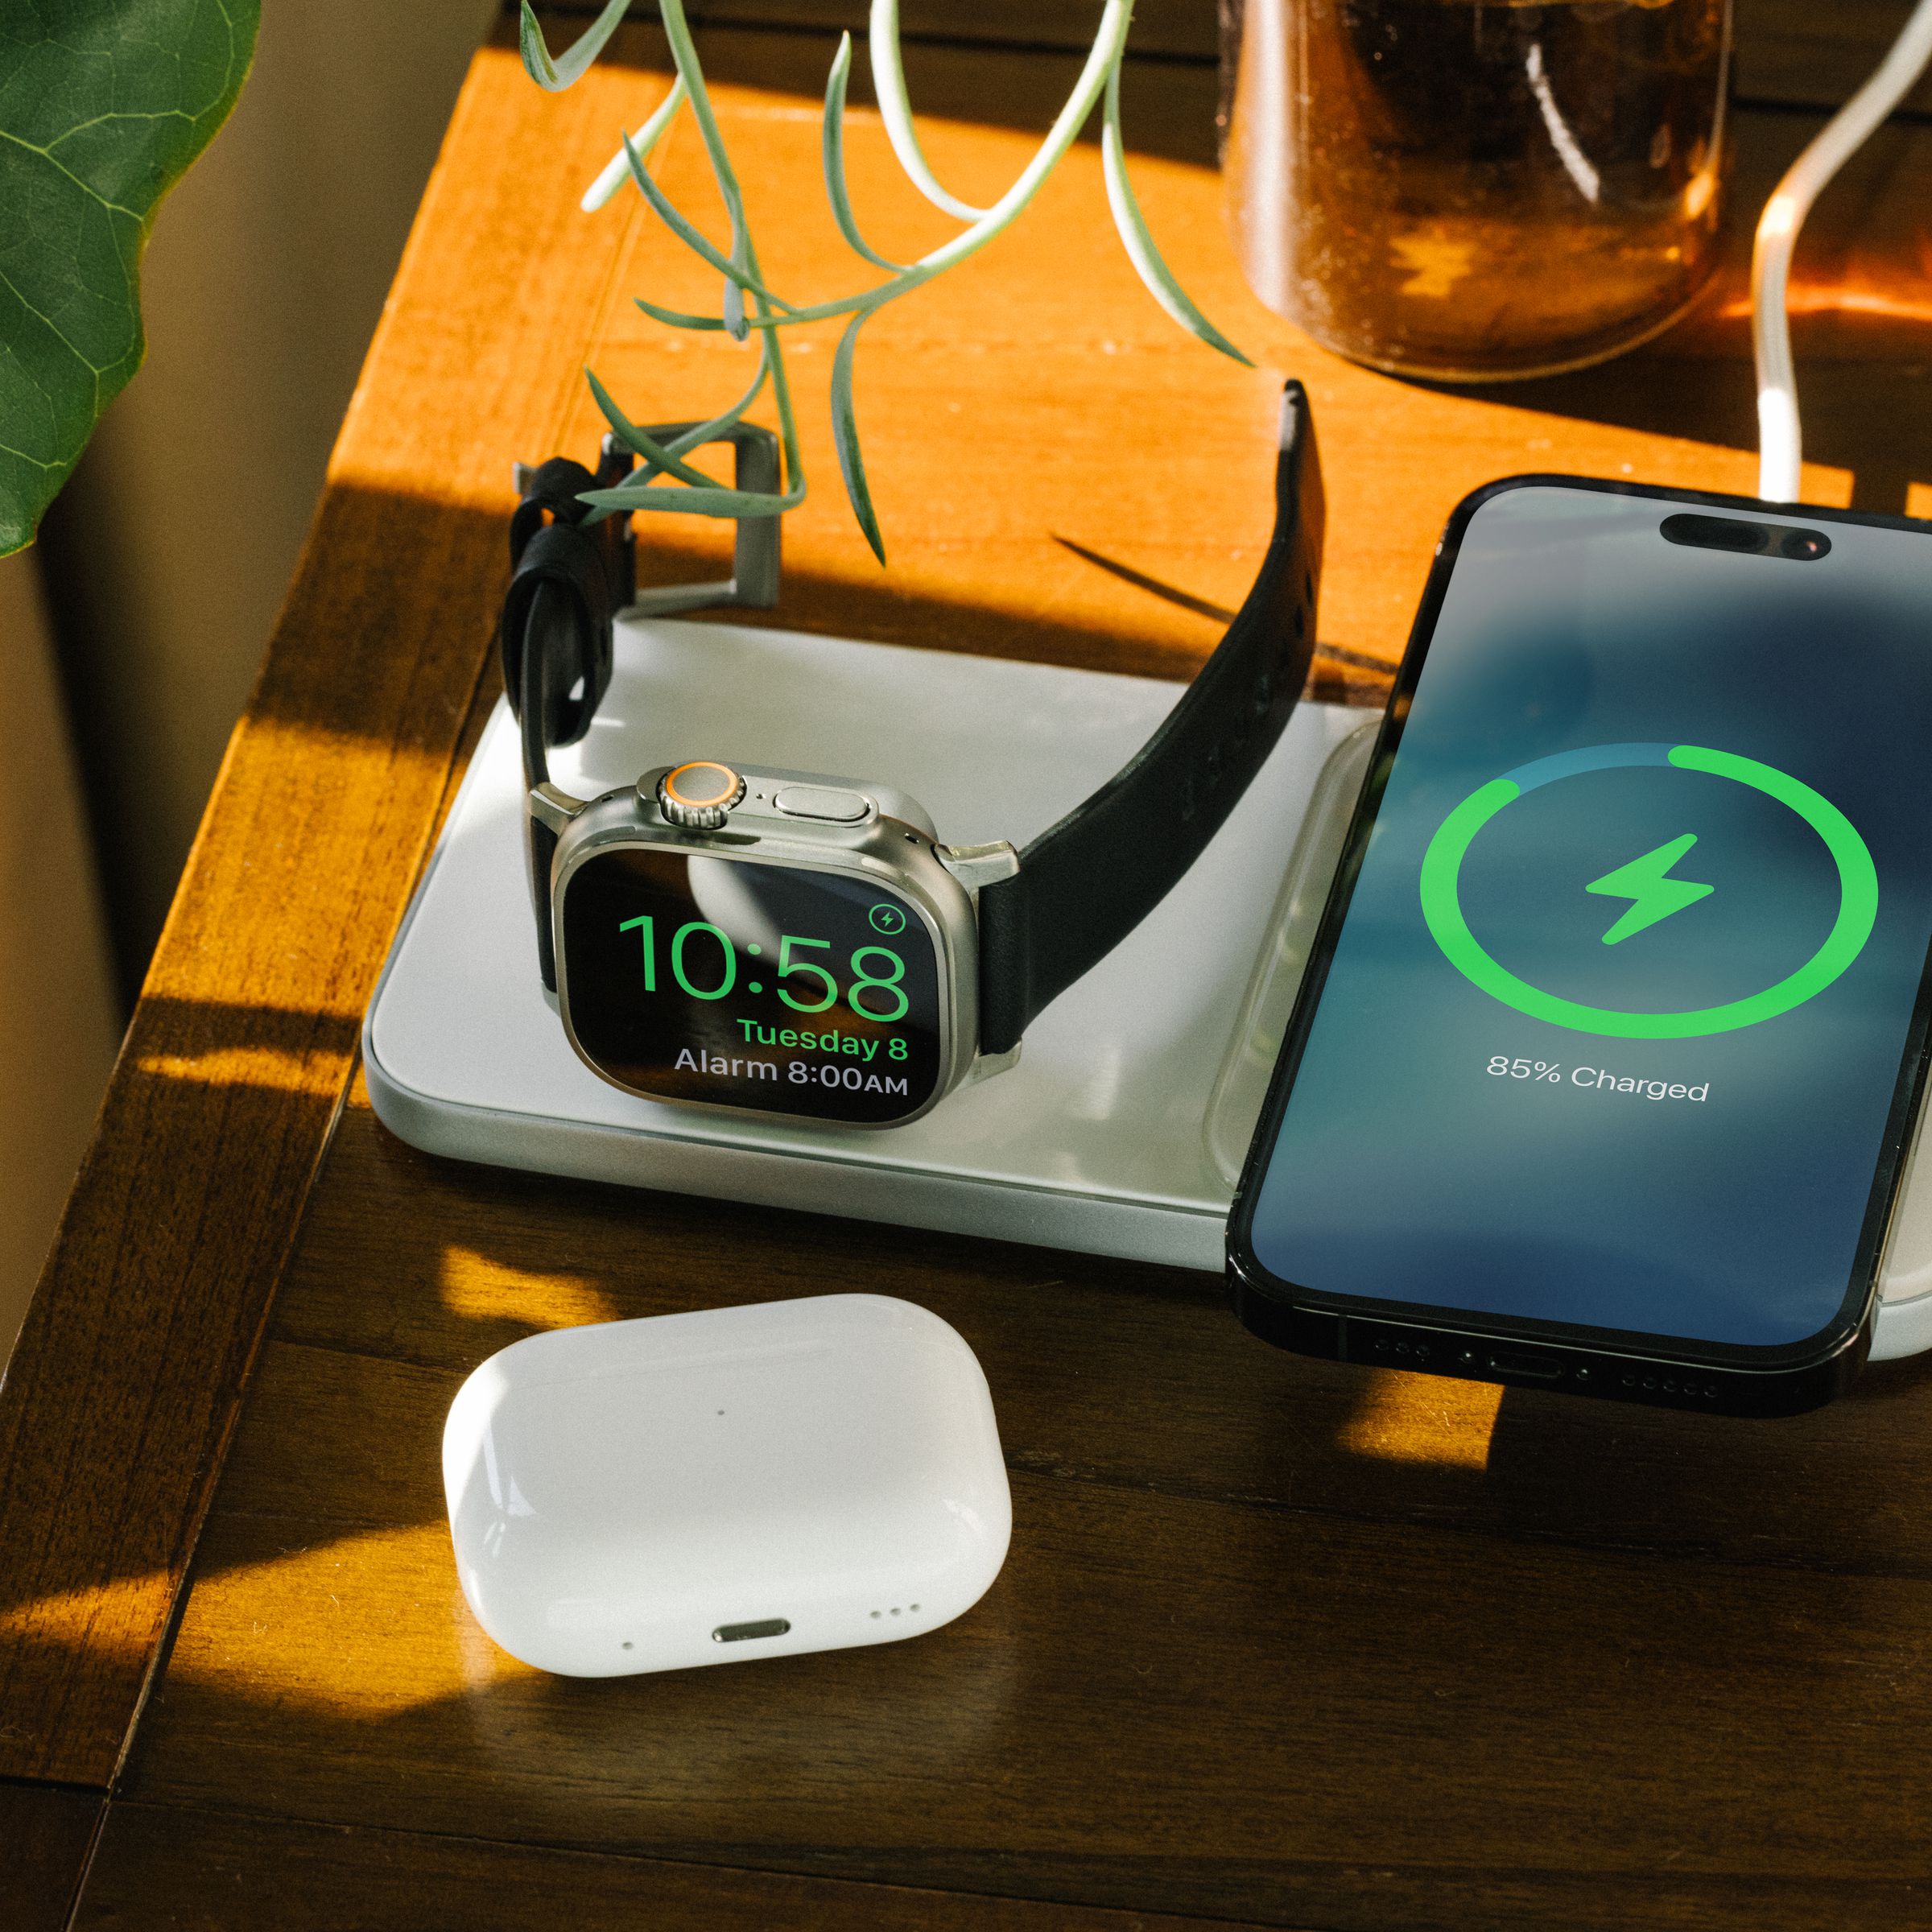 An iPhone and Apple Watch on a table charging on Nomad’s Base One Max wireless charger, with a set of AirPods near.